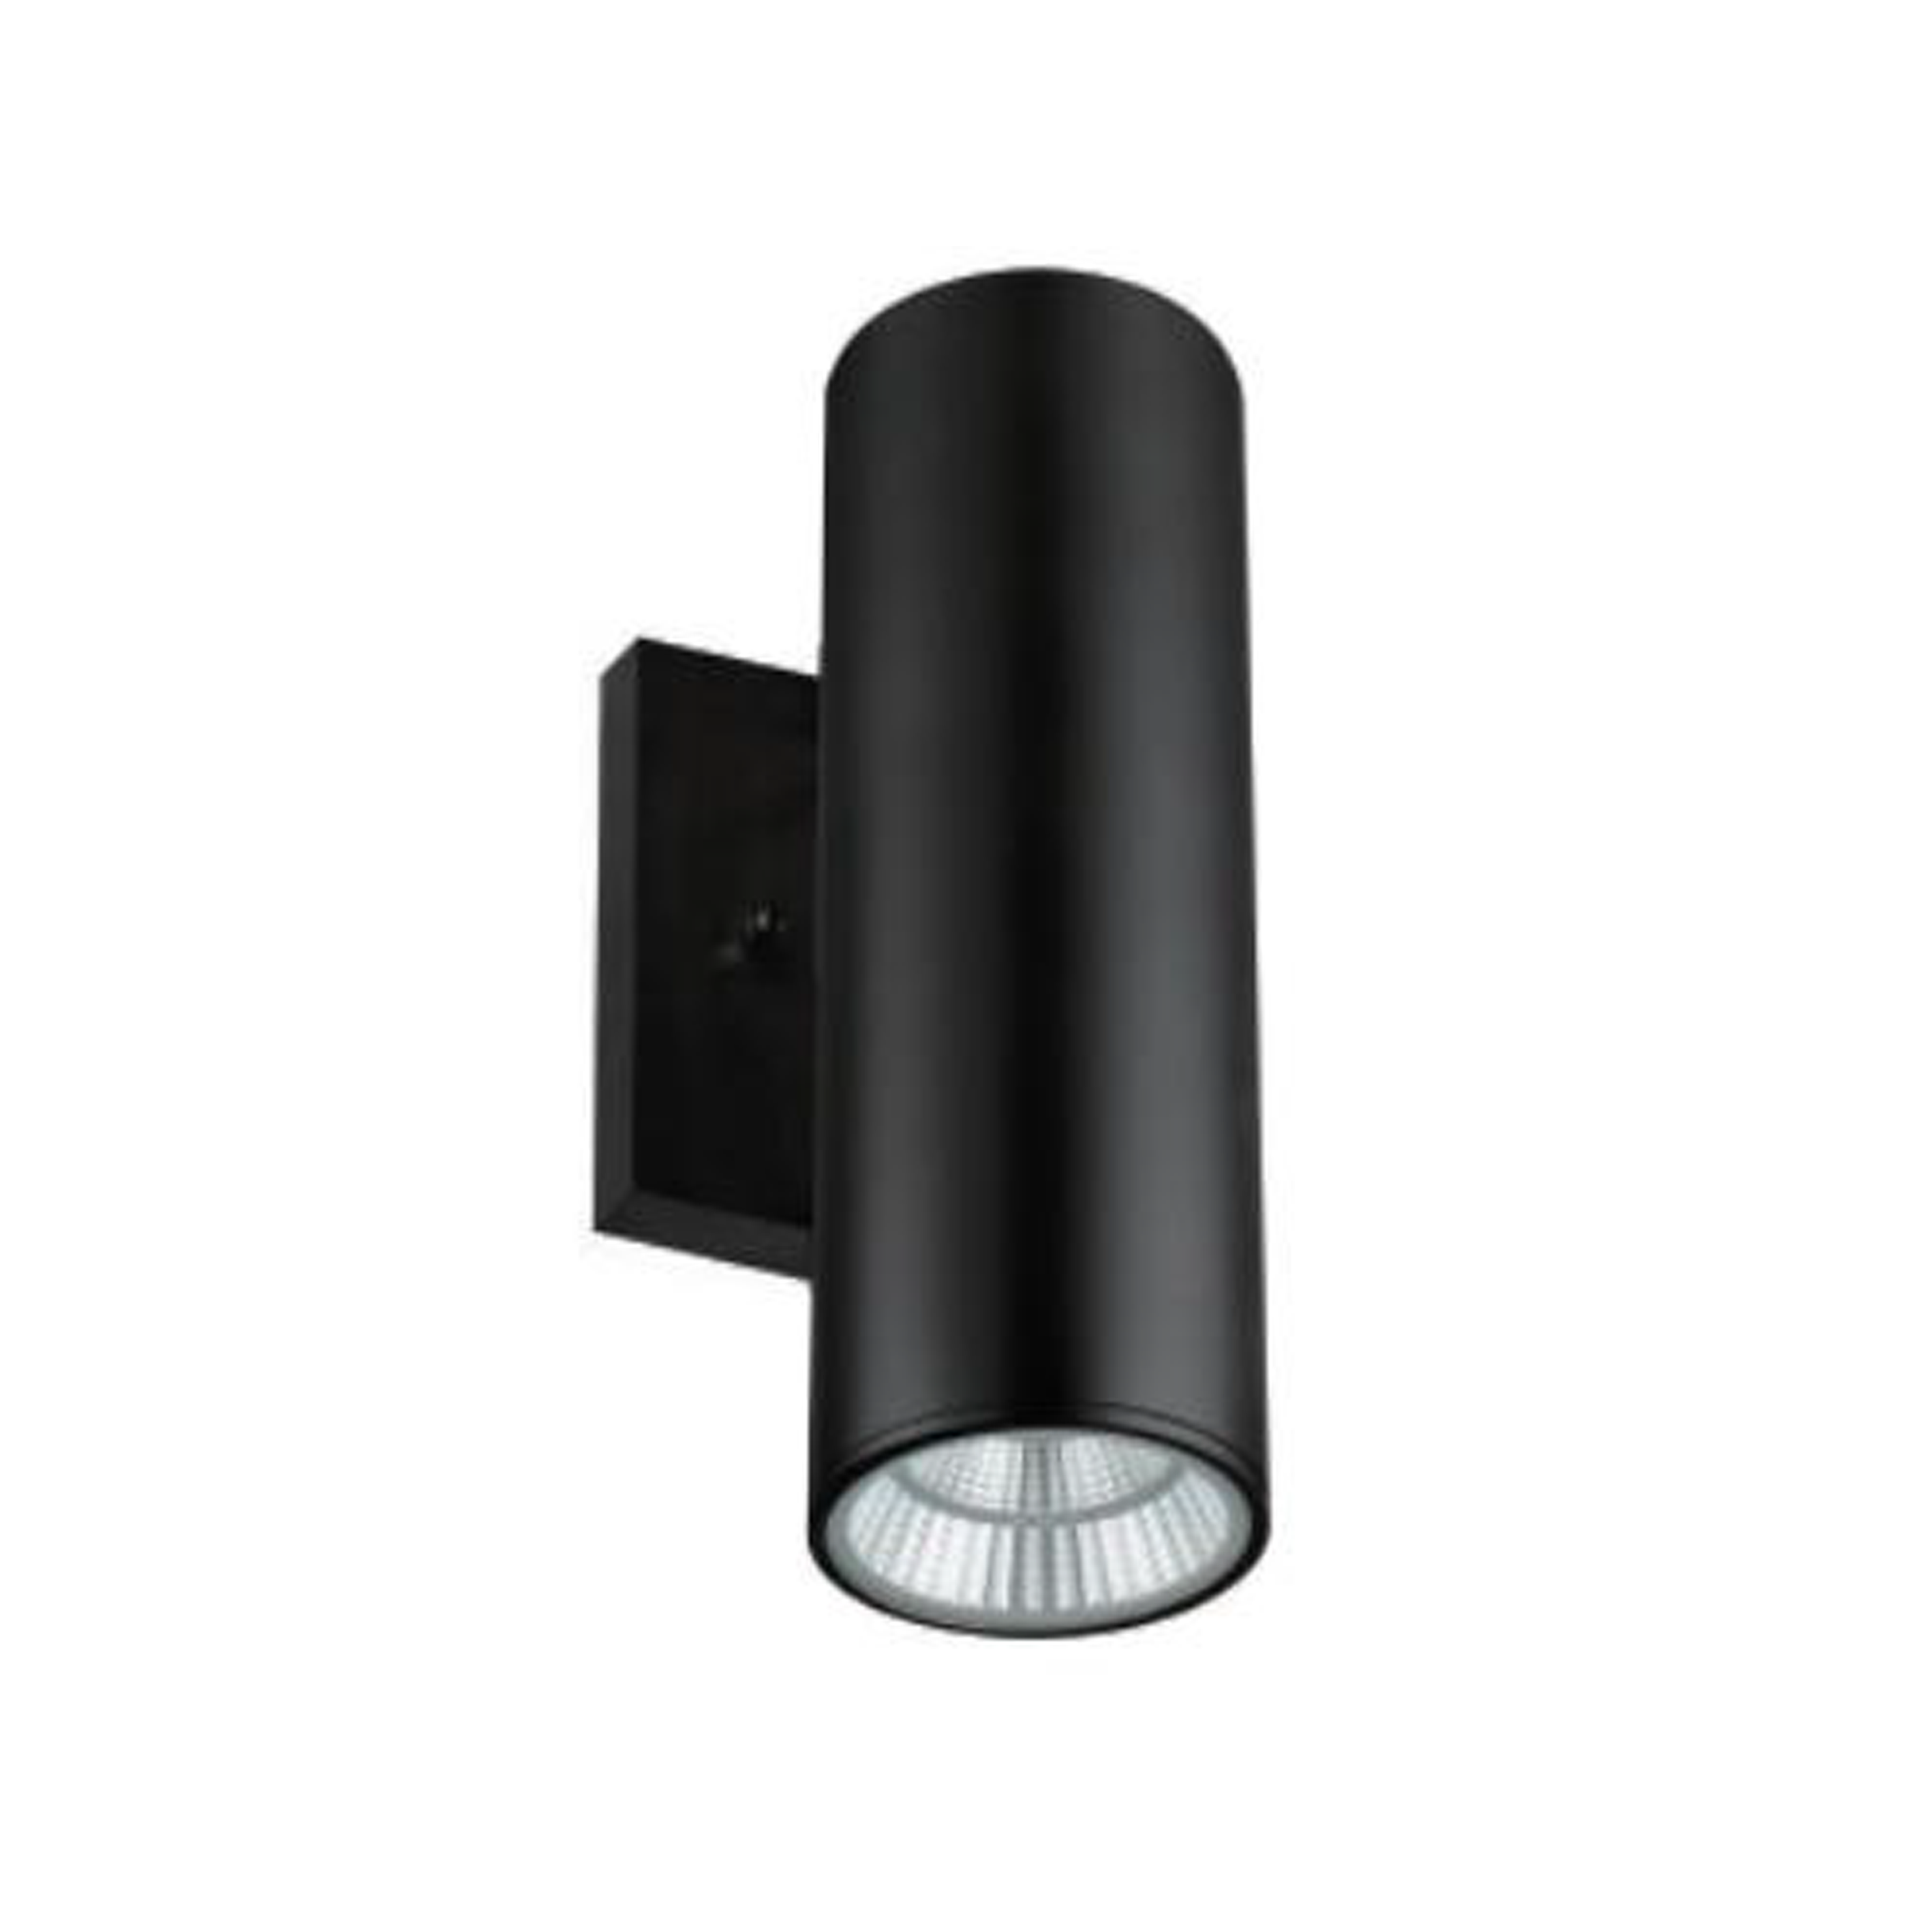 WS632 – Up and Downlight Wall Sconce